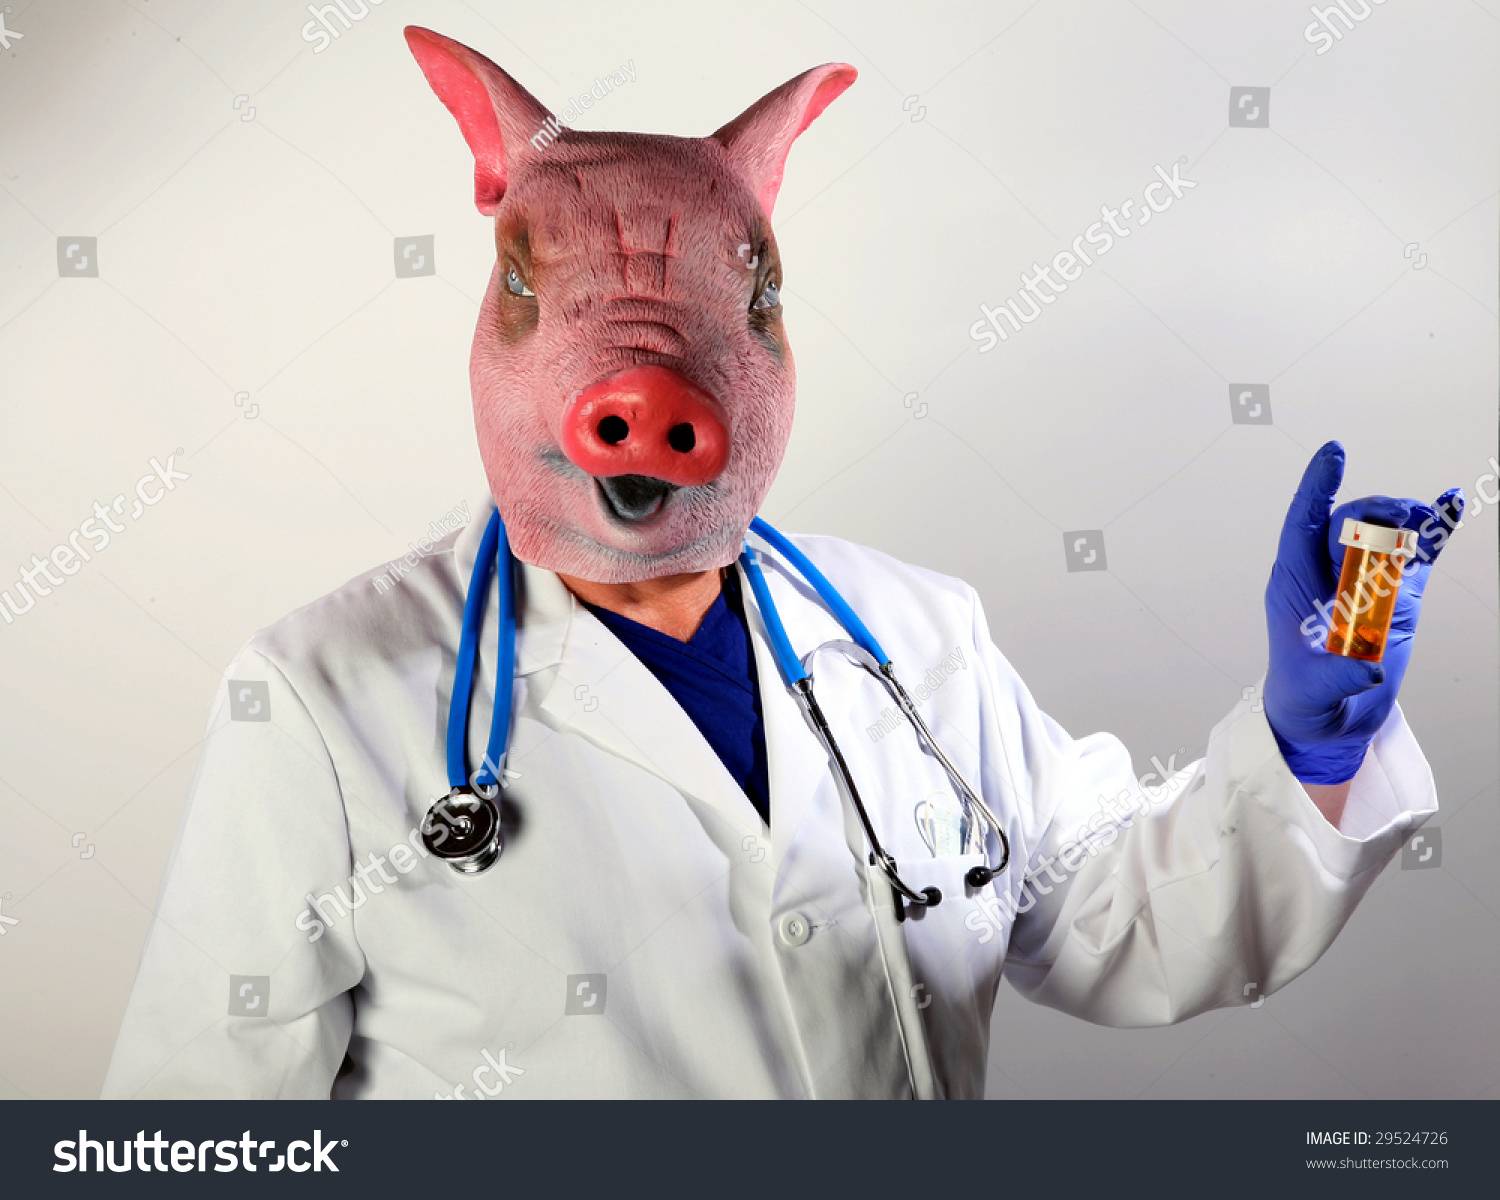 stock-photo-a-doctor-in-a-pig-mask-holds-a-bottle-of-pills-representing-the-mexican-swine-flu-pandemic-29524726.jpg